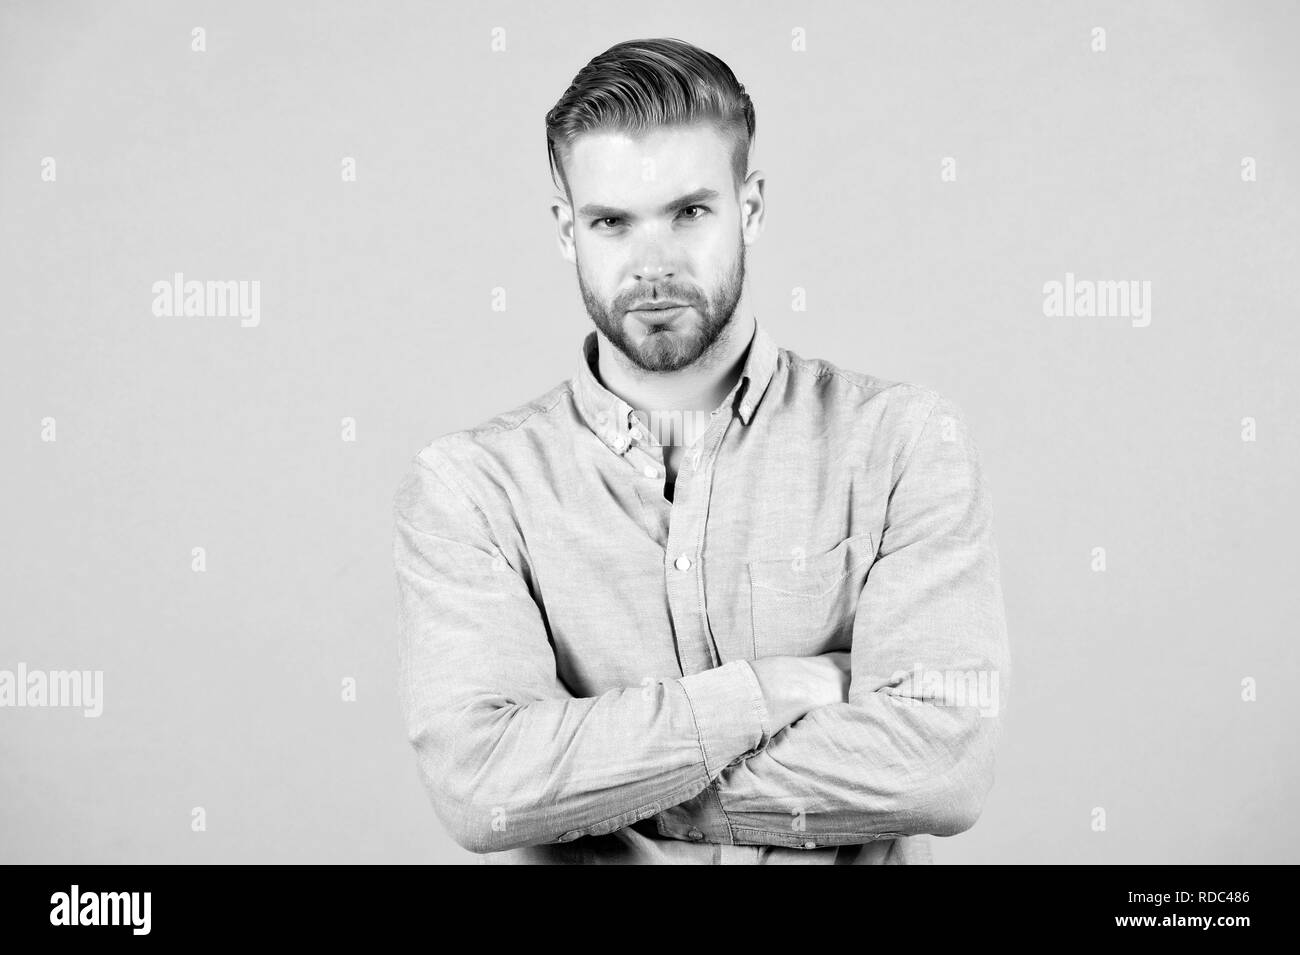 Bearded man keep arms crossed on grey background. Macho in blue tshirt with serious face. Tired after everyday work. Office dress code. Casual in style. Confidence and charisma. Young and handsome. Stock Photo